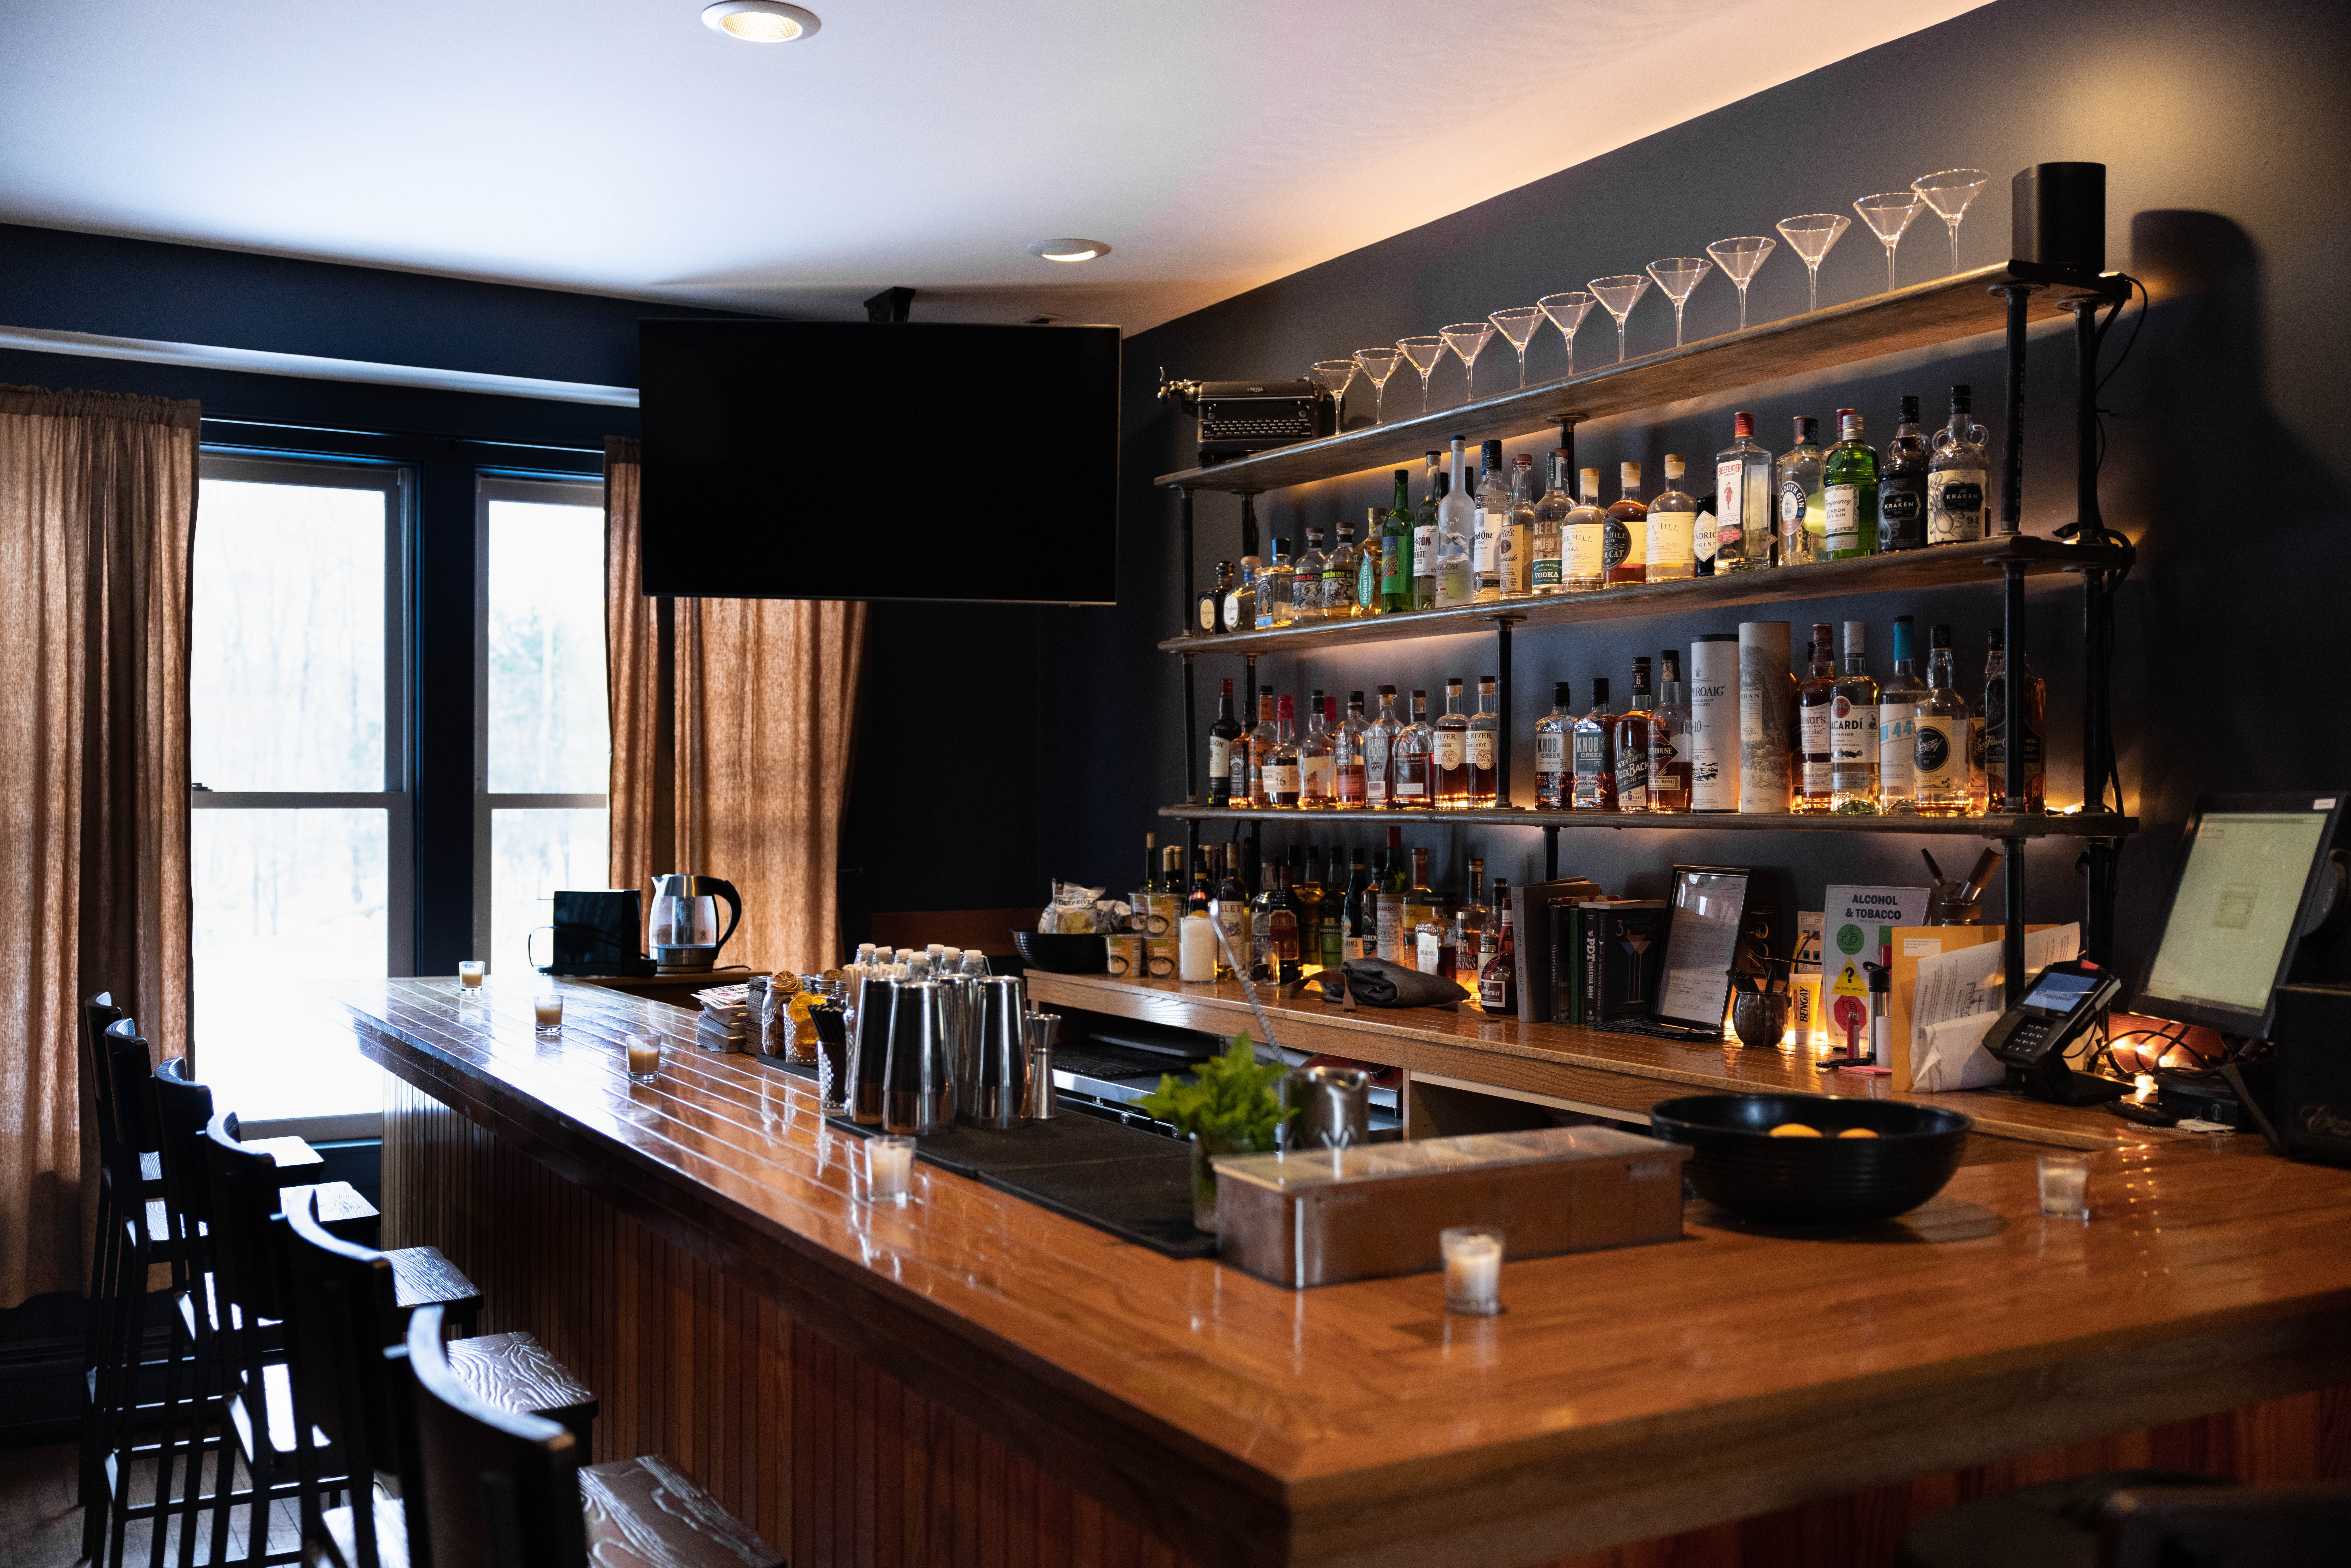 Wooden bar with liquor on shelving behind